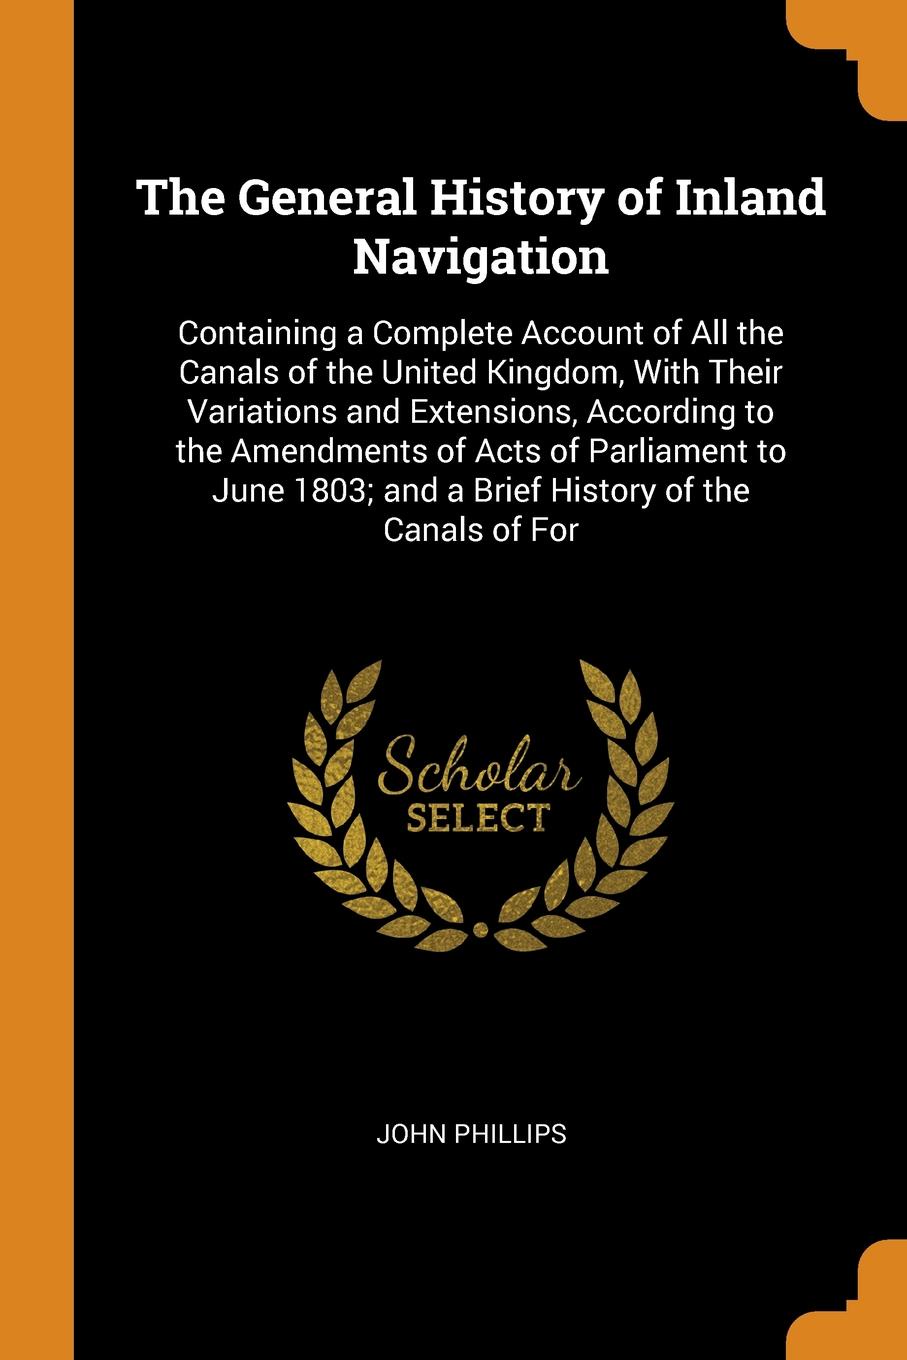 The General History of Inland Navigation. Containing a Complete Account of All the Canals of the United Kingdom, With Their Variations and Extensions, According to the Amendments of Acts of Parliament to June 1803; and a Brief History of the Canal...